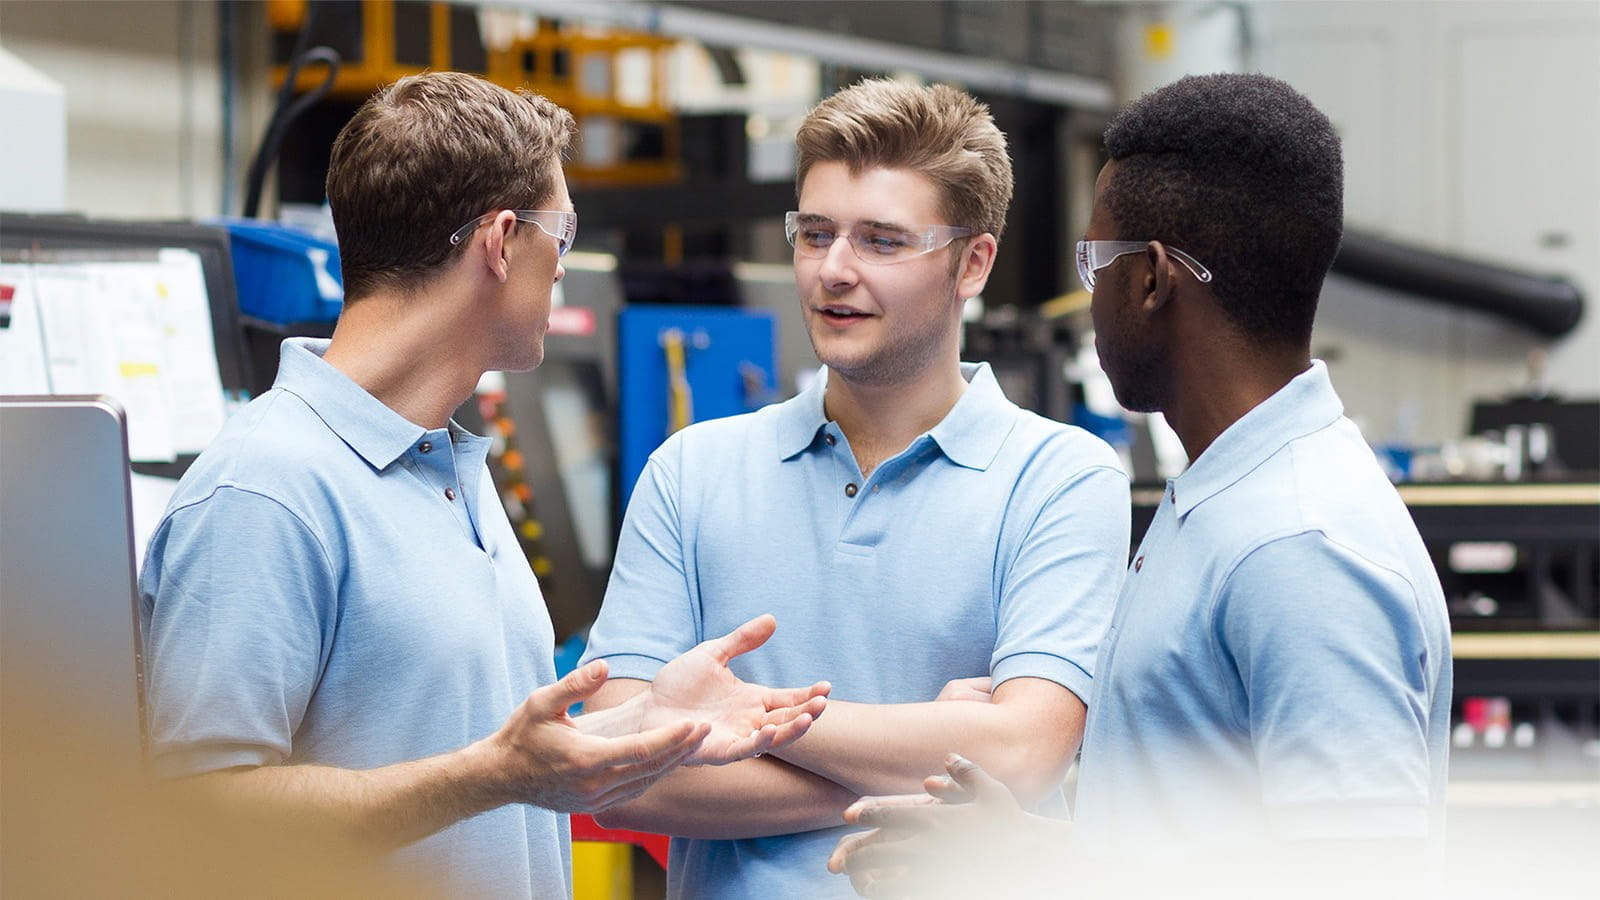 three young men apprentices apprenticeship work warehouse blue polo shirts safety glasses